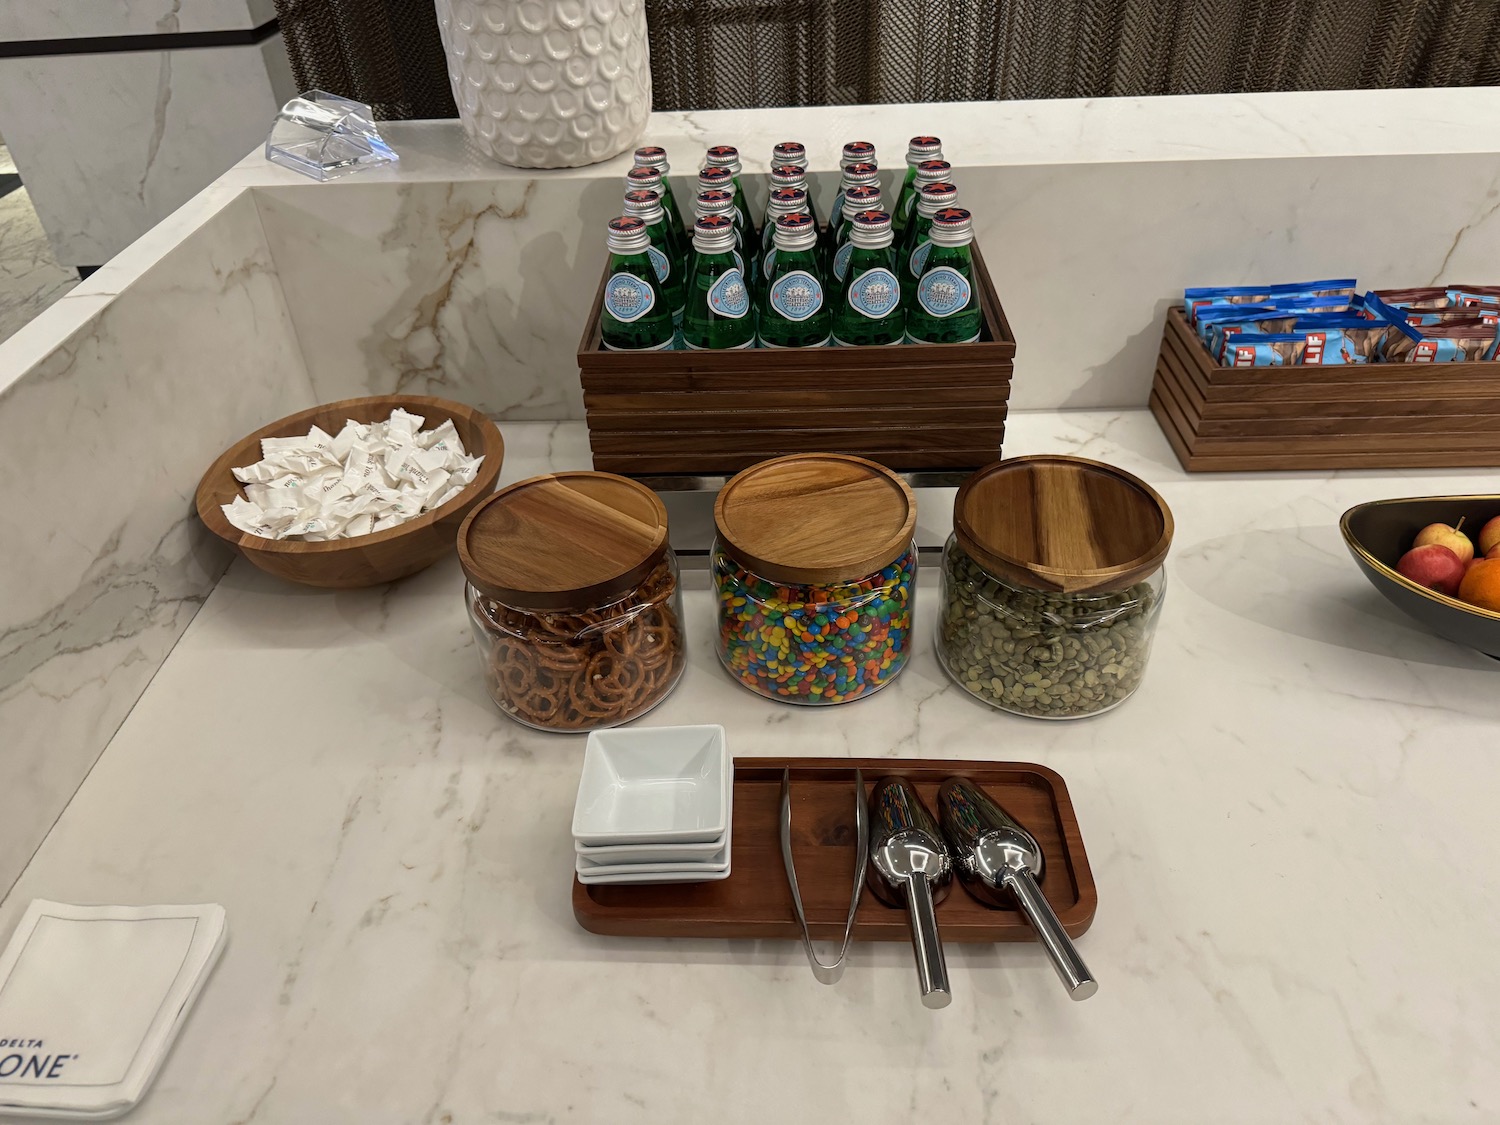 a table with different containers and bottles of soda